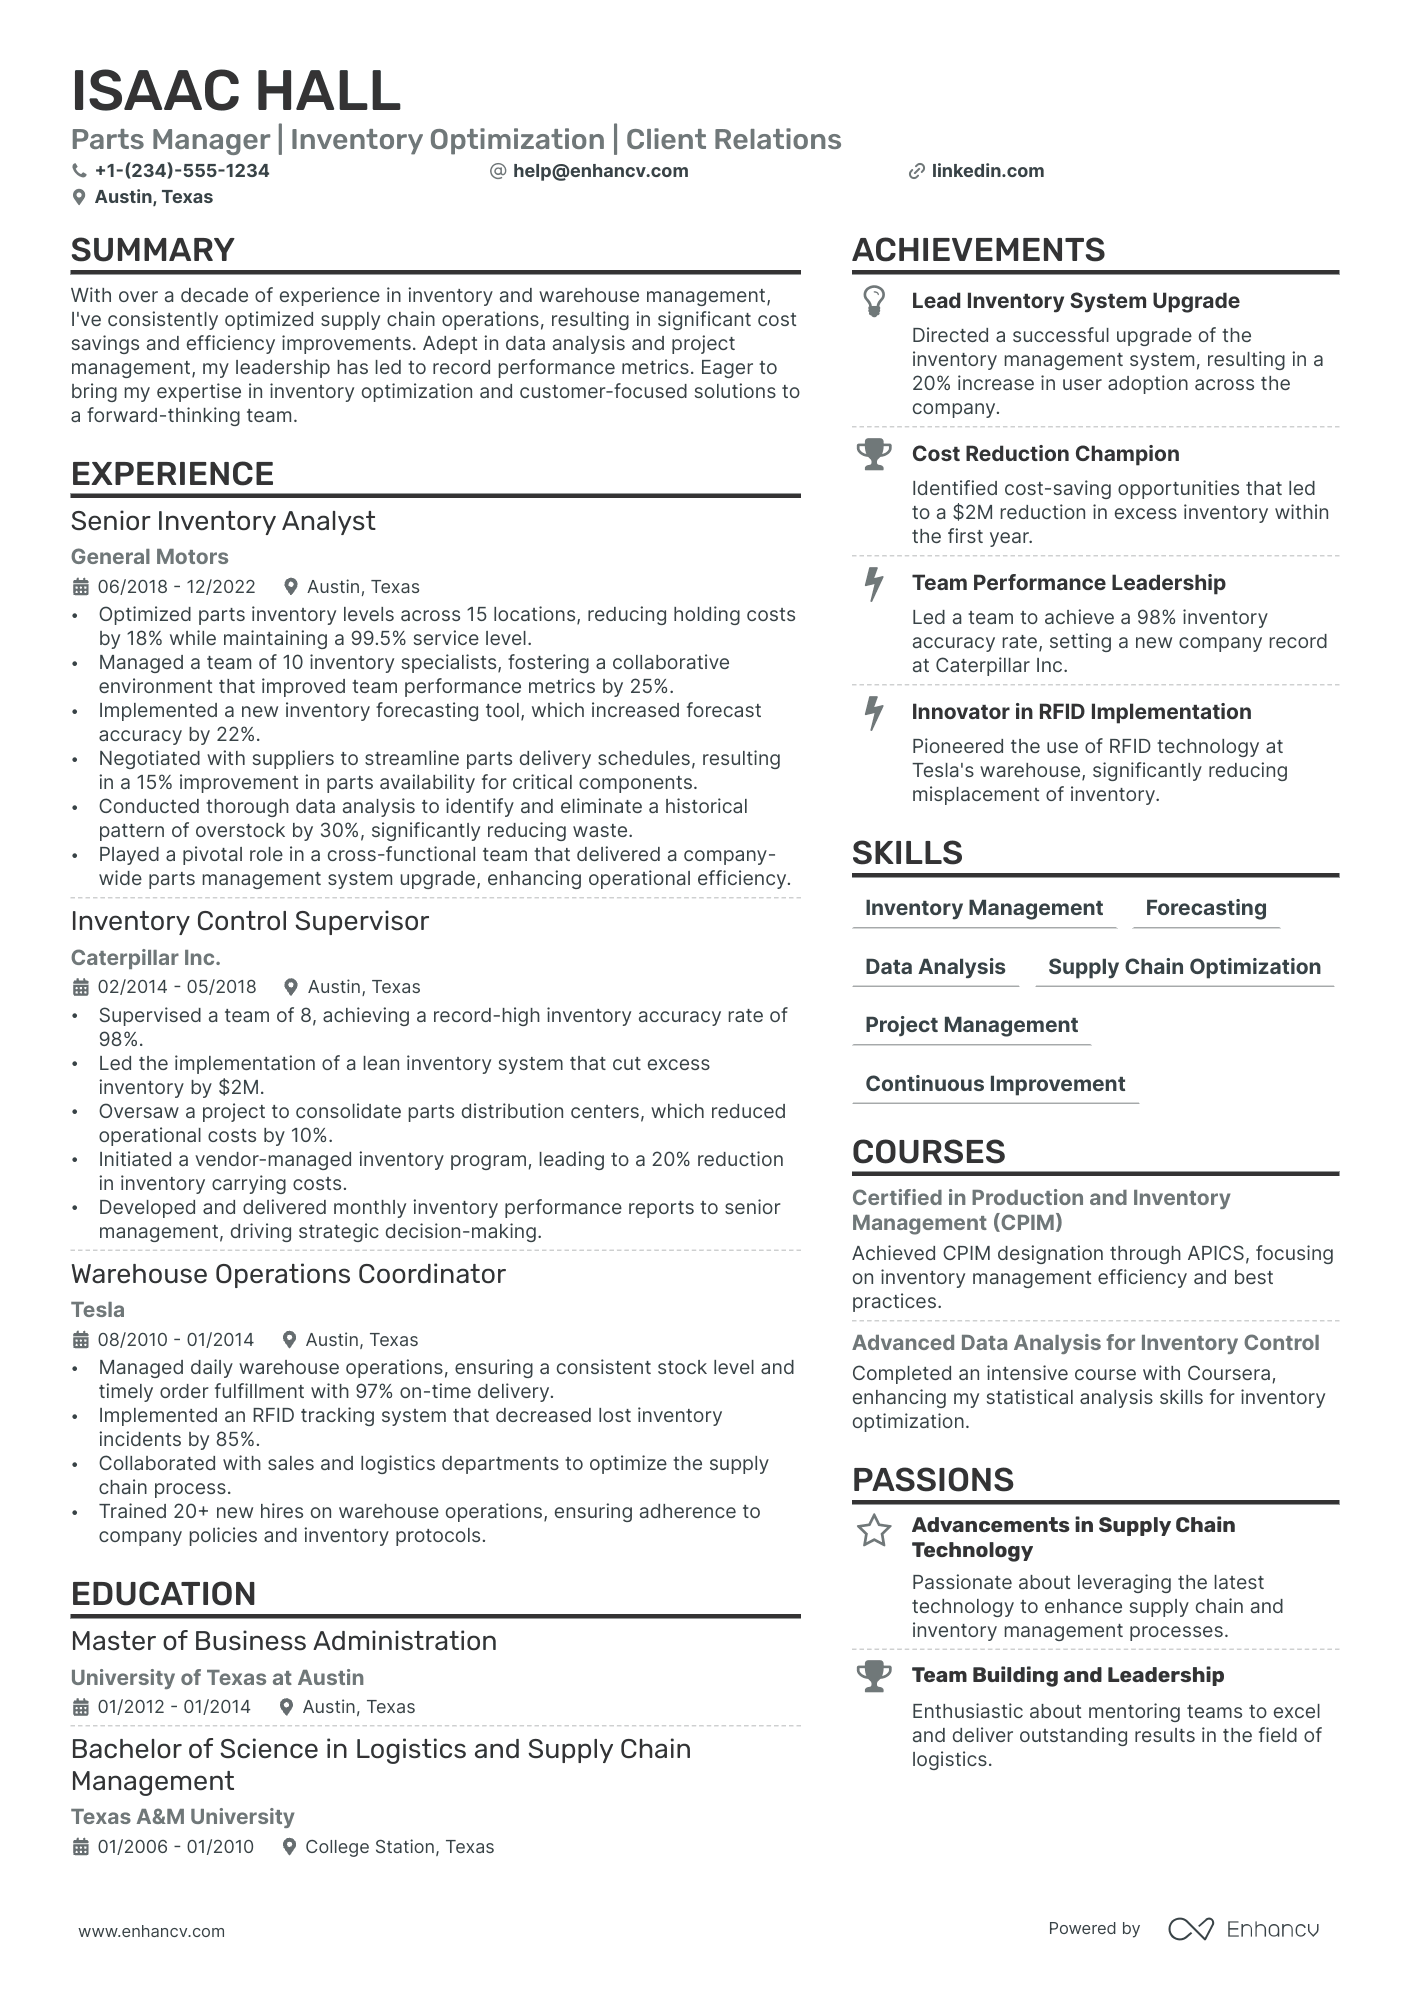 Parts Manager resume example